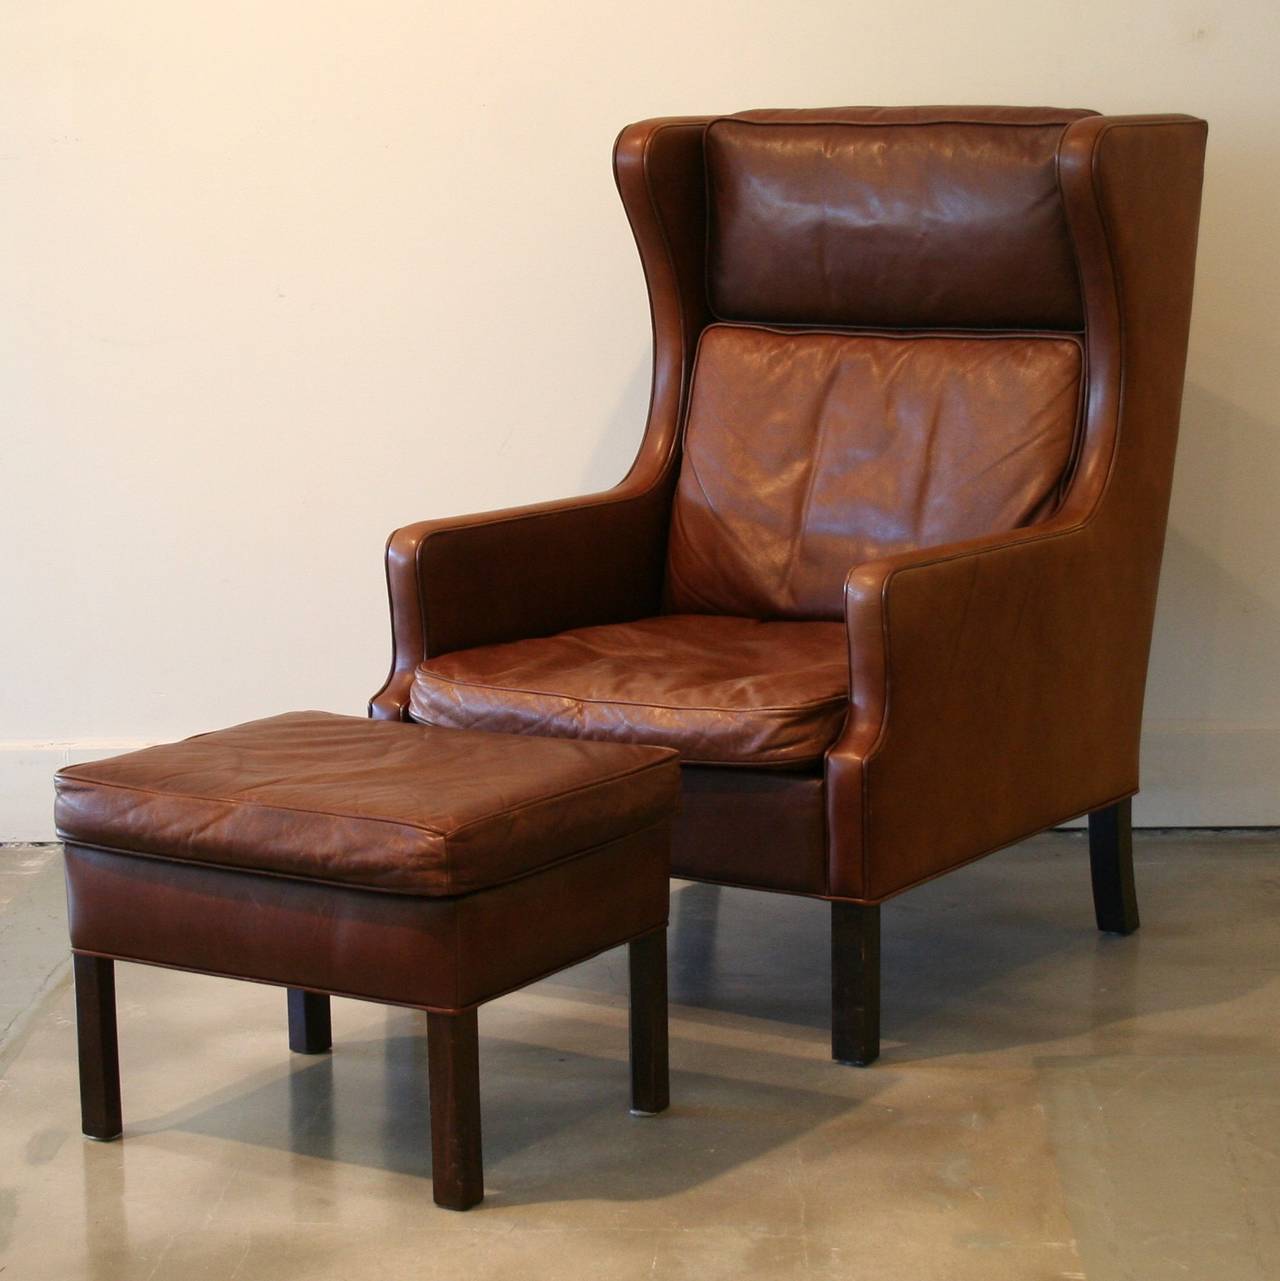 This brown leather wing-back chair is designed in the style of Borge Mogensen, with a gently slanted back and side wings which slope down into the armrests. Cushions have removable covers and are filled with foam and down/feather wrap. This charming